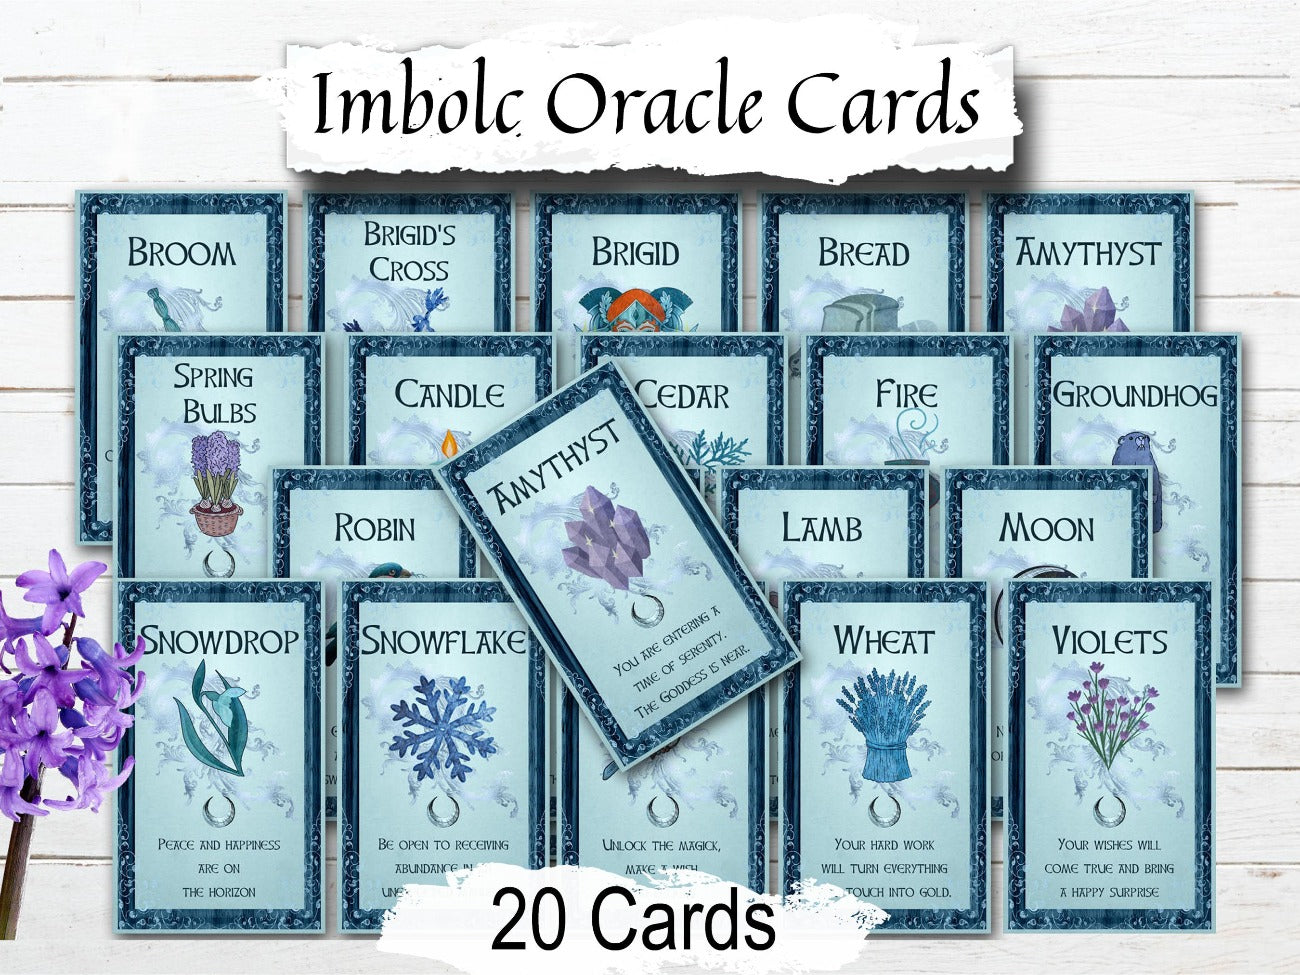 IMBOLC ORACLE CARDS, Wicca Witchcraft Printable Tarot, Inspirational Messages, Candlemas Wicca Divination Deck, Wheel of the Year Messages - Morgana Magick Spell